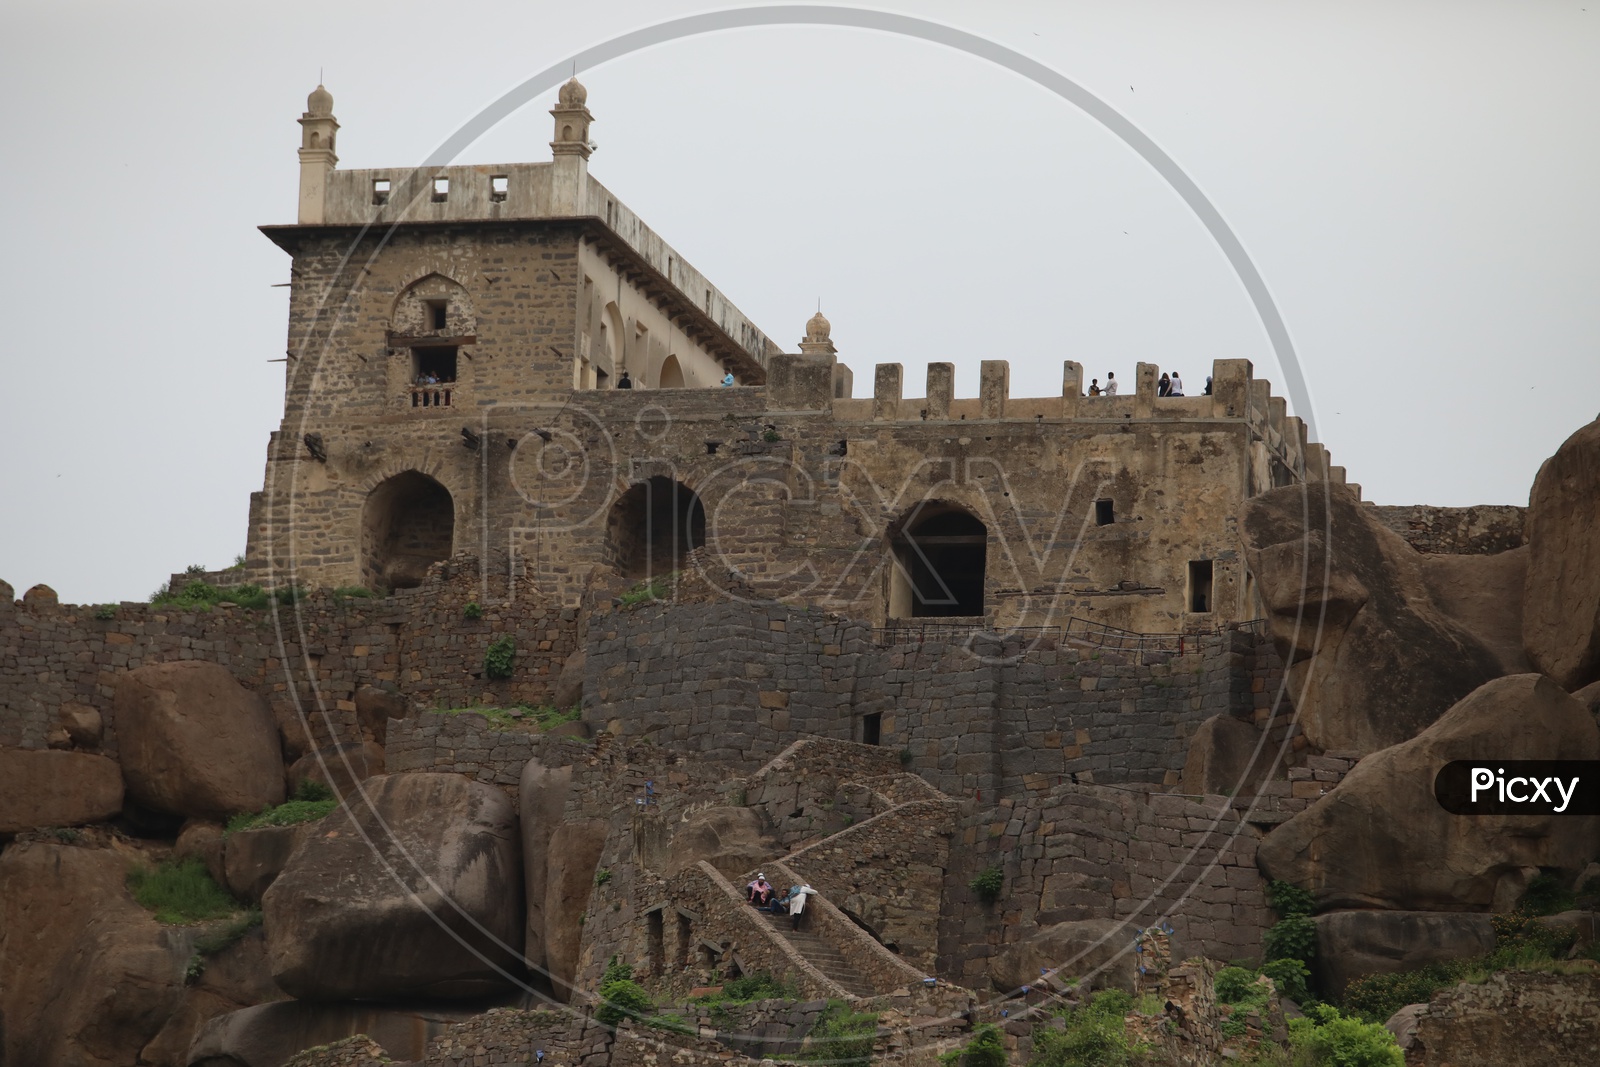 Top of  Iconic Golconda Fort